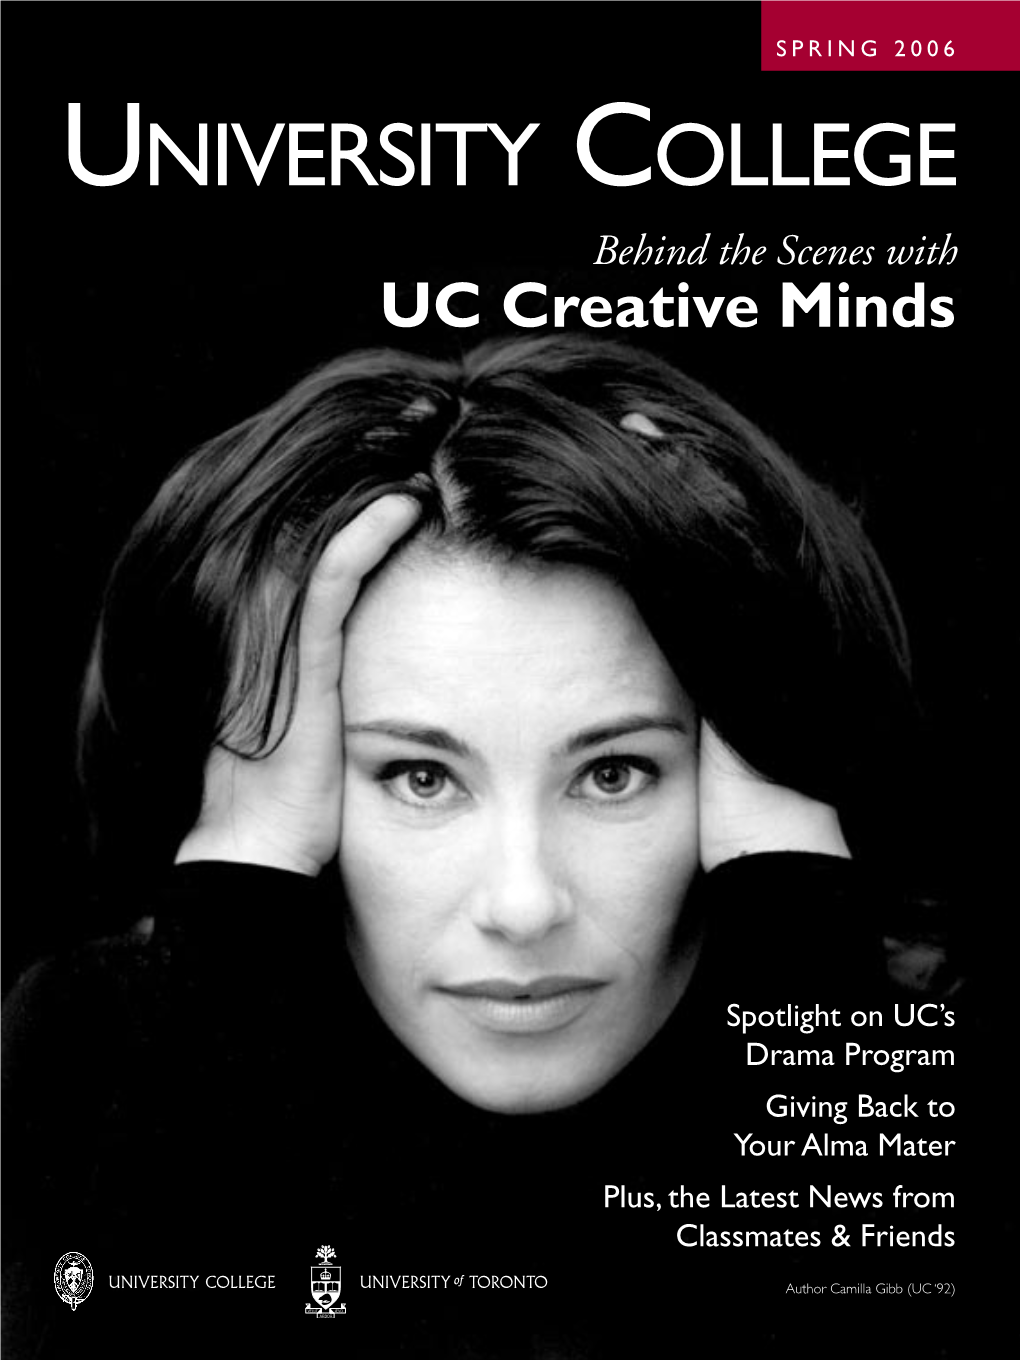 UNIVERSITY COLLEGE Behind the Scenes with UC Creative Minds